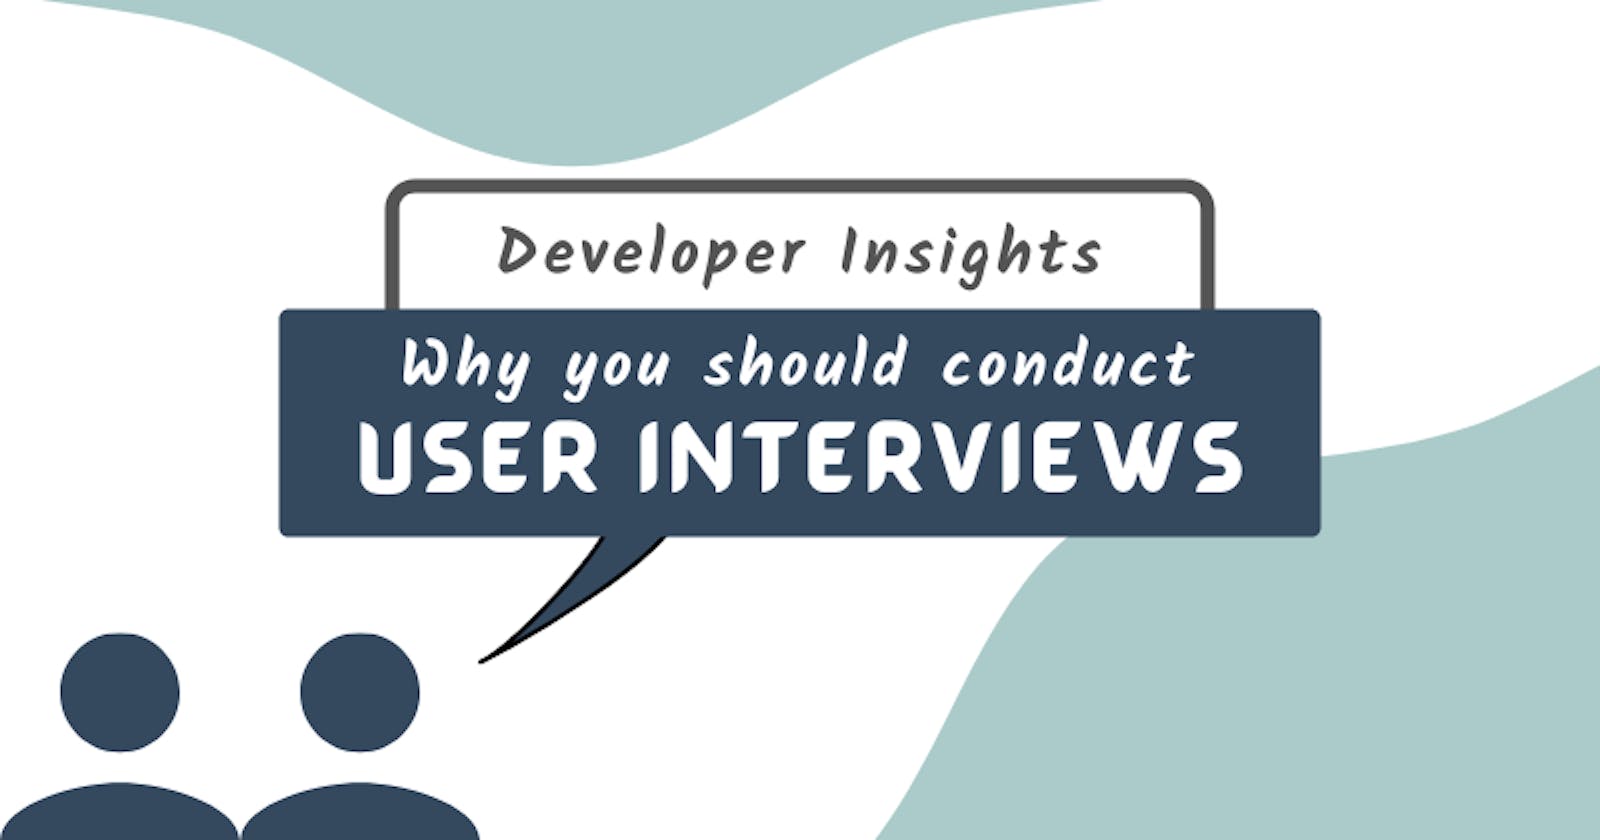 Developer insights: Why you should conduct user interviews